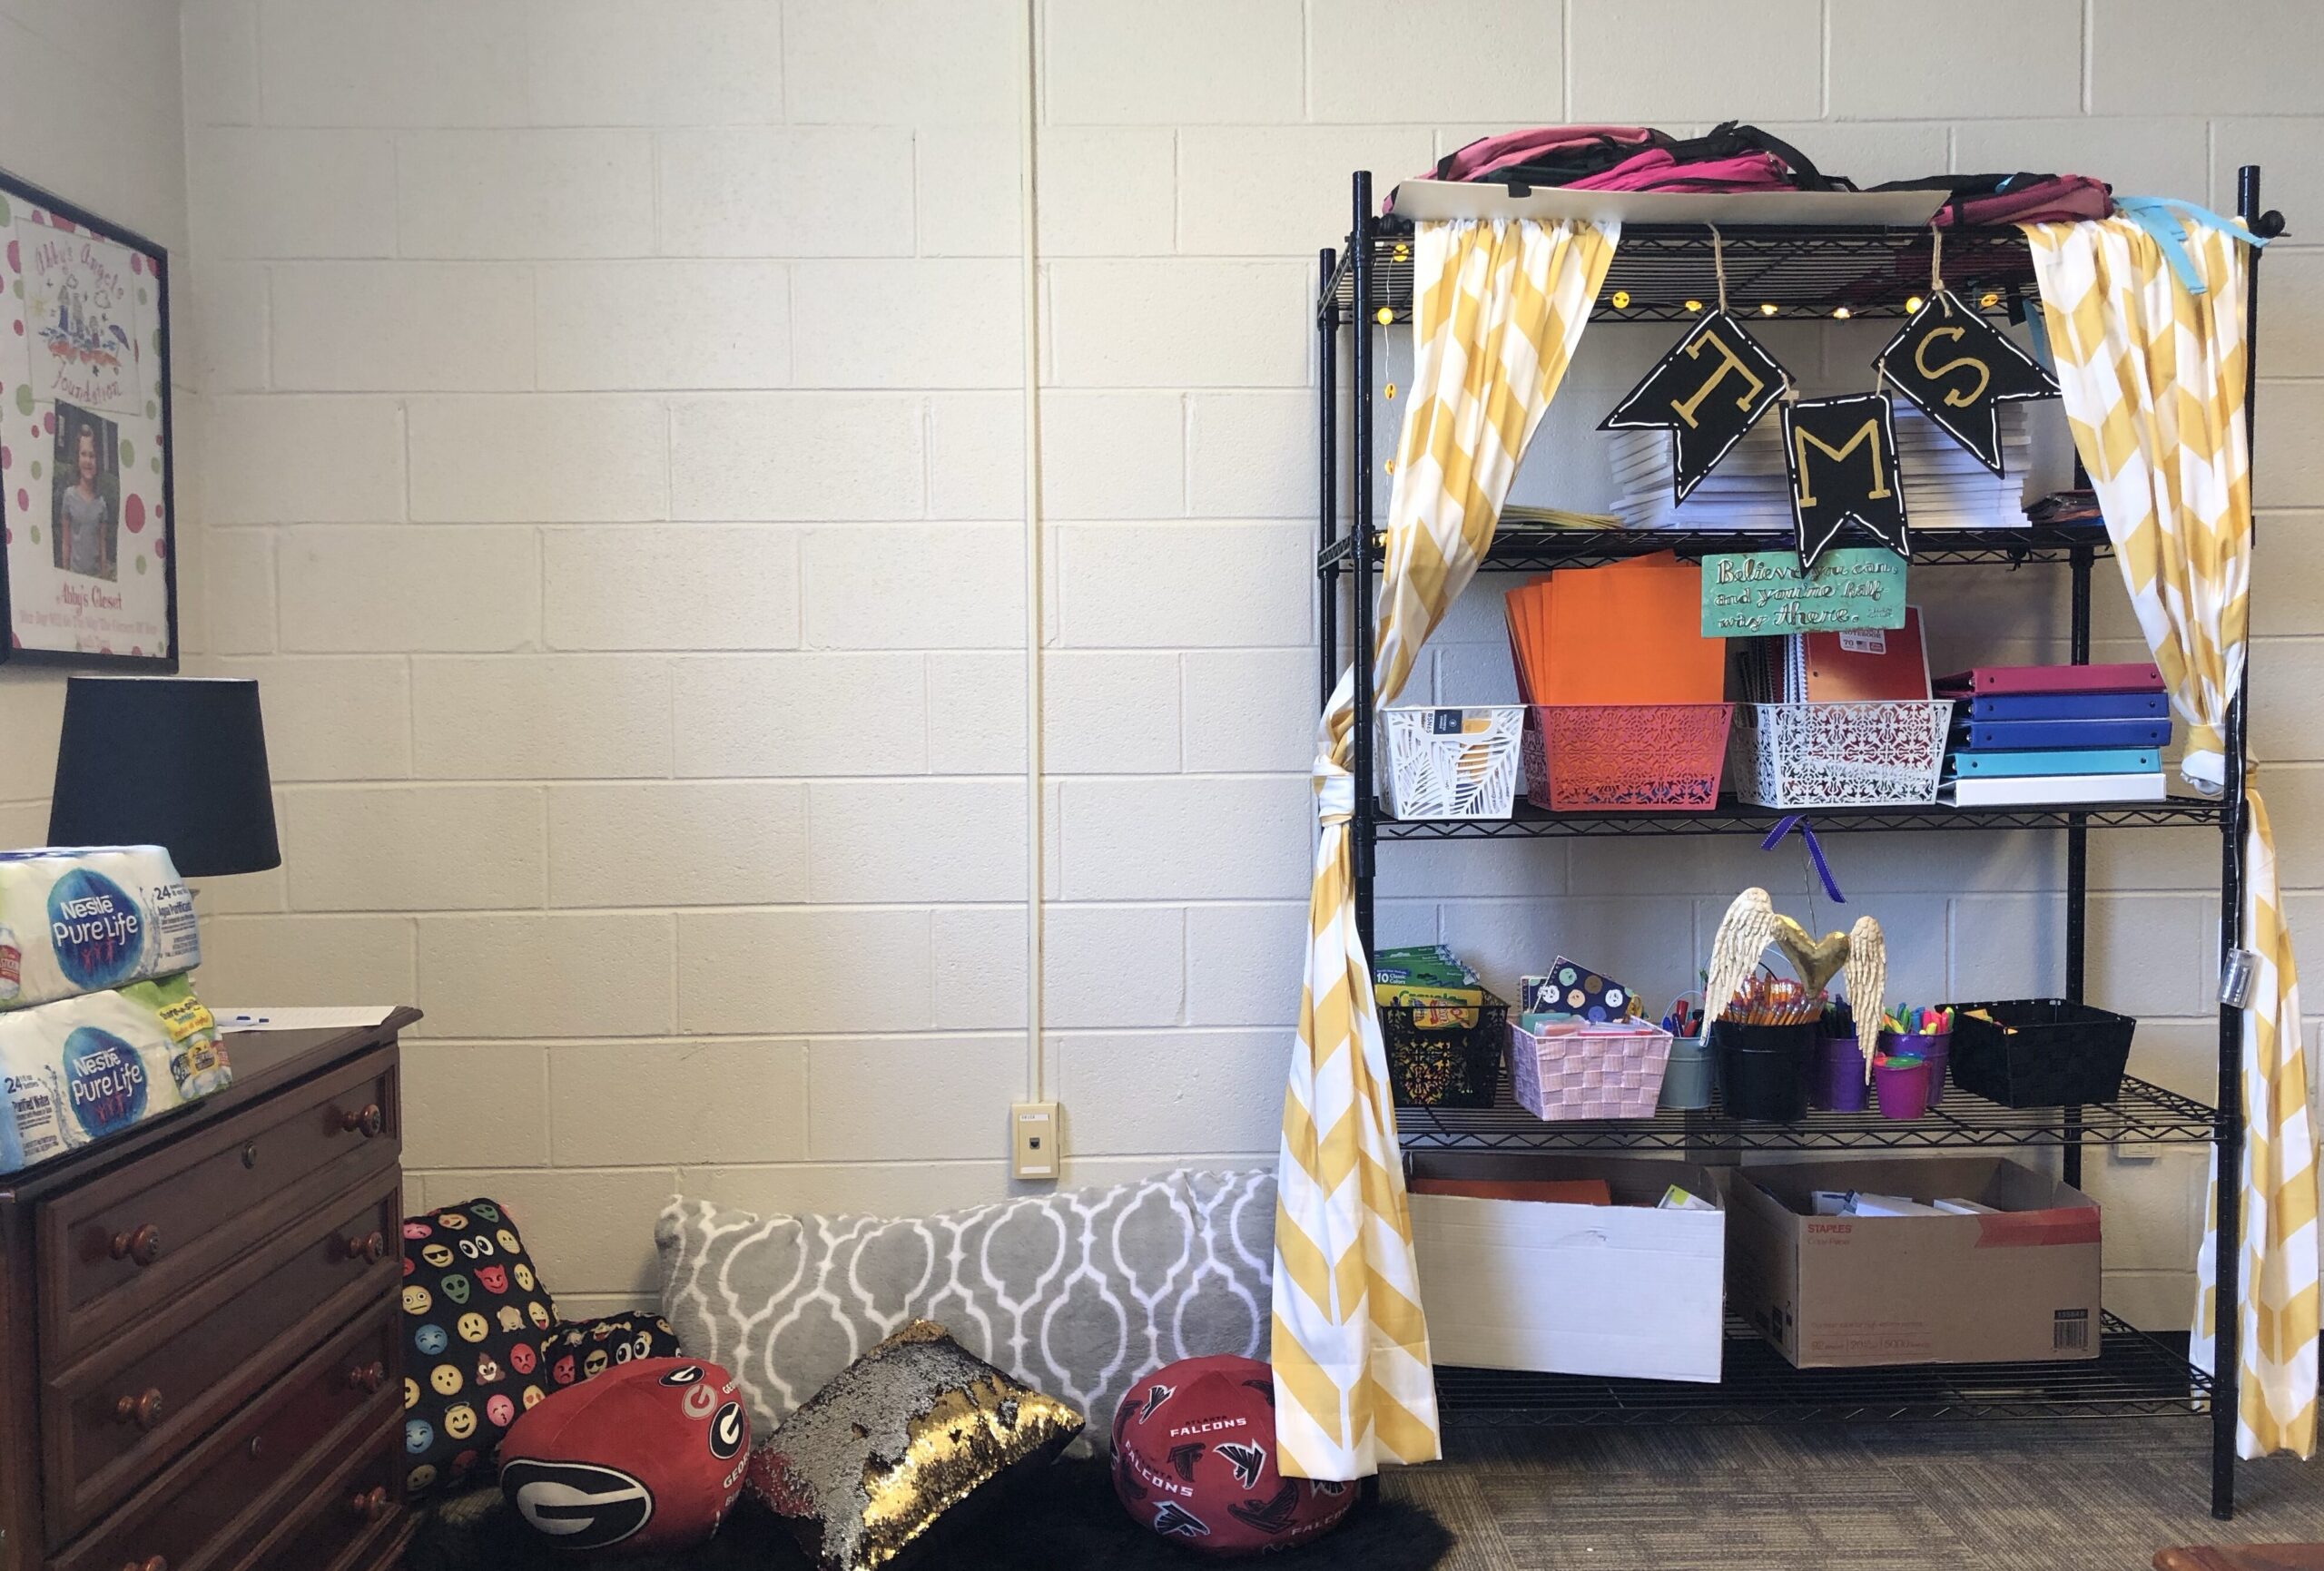 Featured image for “Partners Advancing Student Success keeps kids warm through supply closets”